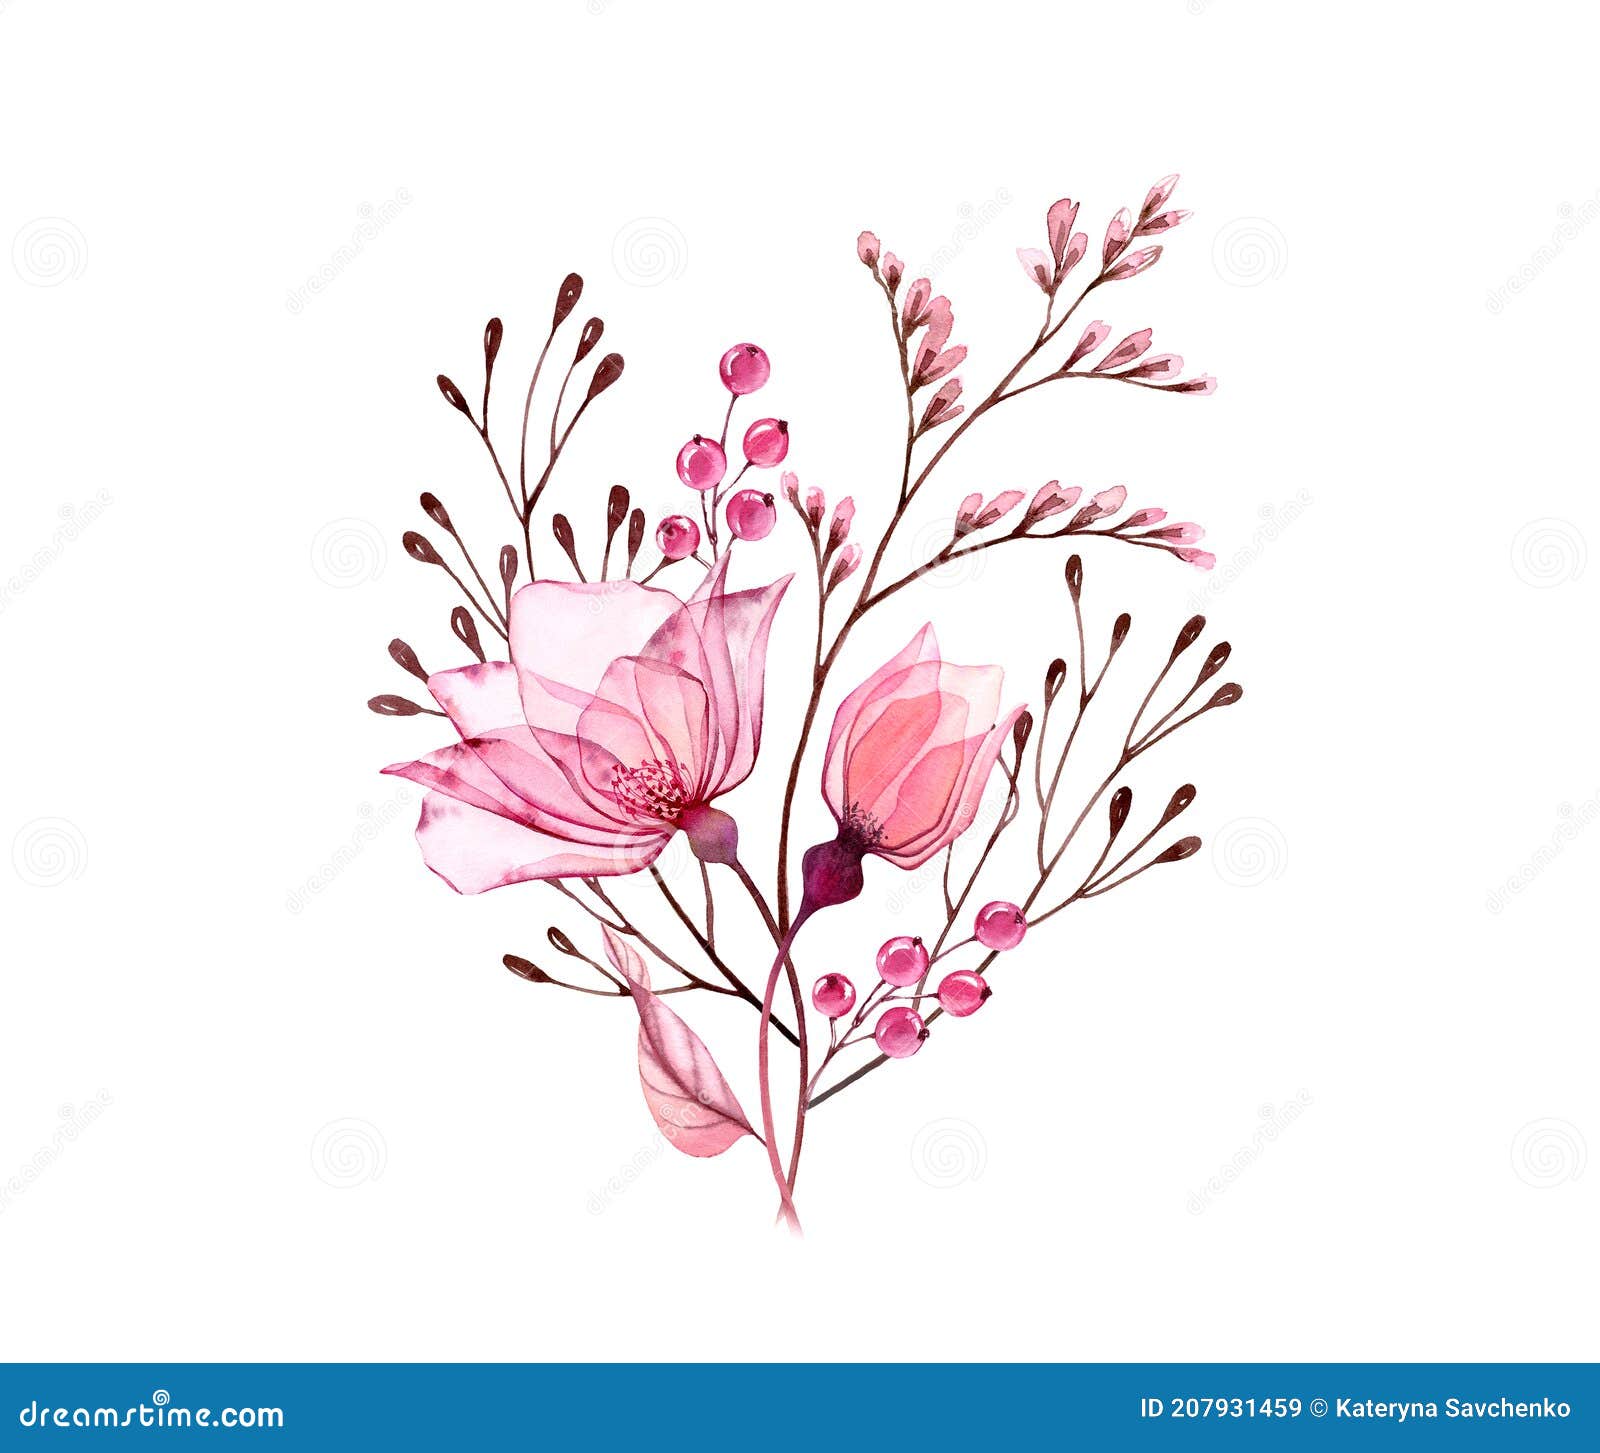 Watercolor Rosebud Isolated on White. Hand Draw Illustrations